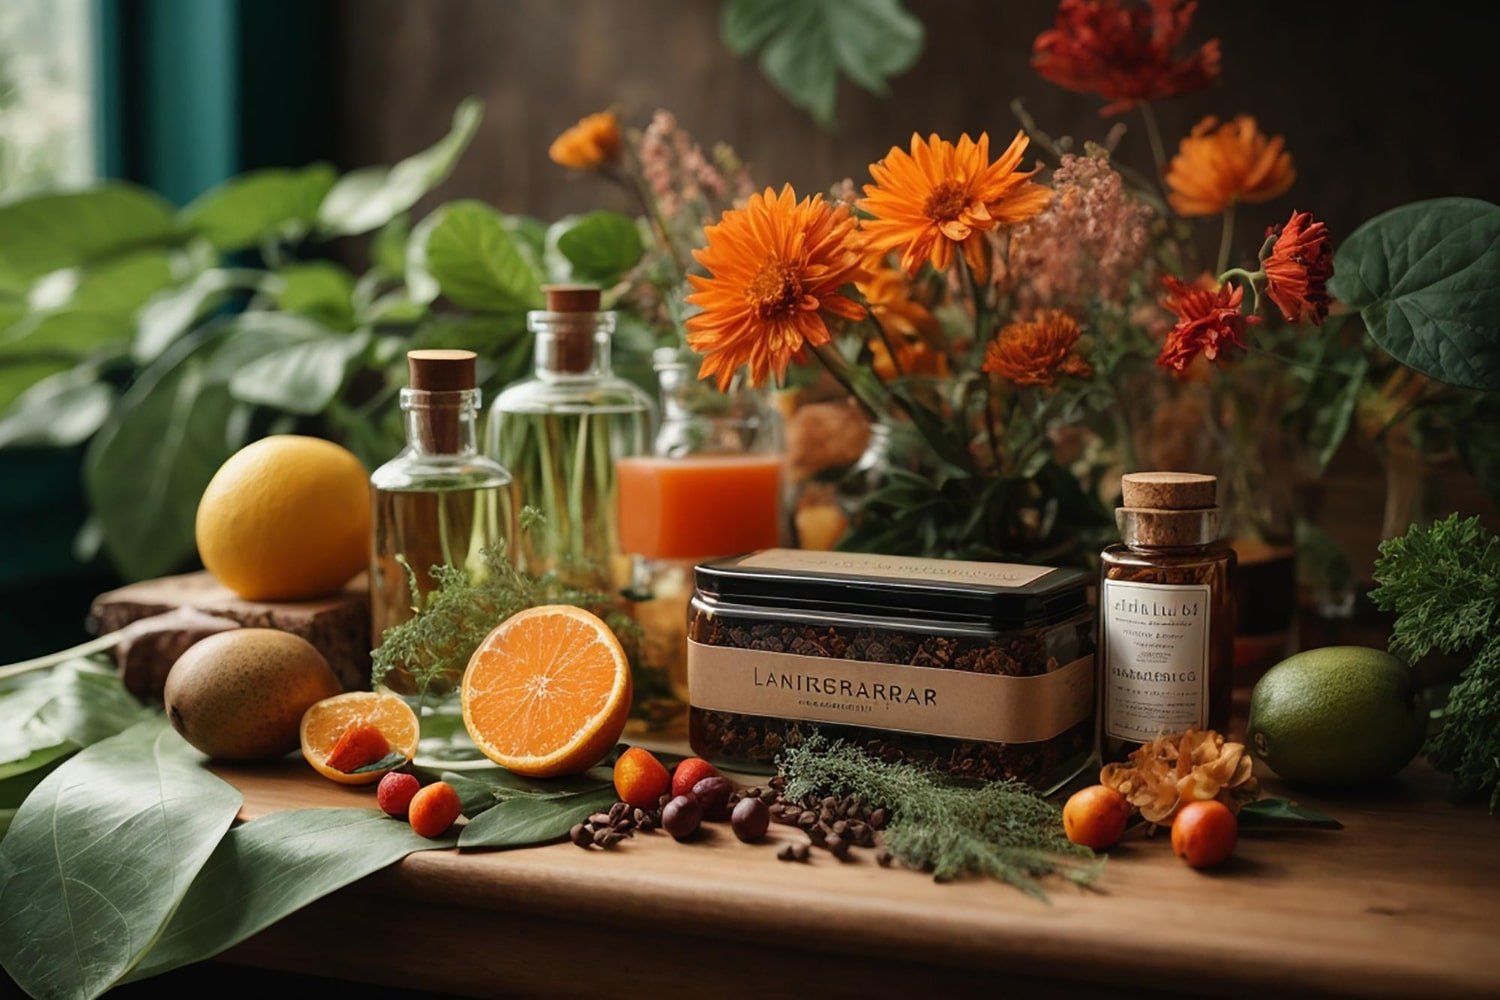 Discover Natural And Organic Health Products With Smallflower.com’s Apothecary Store